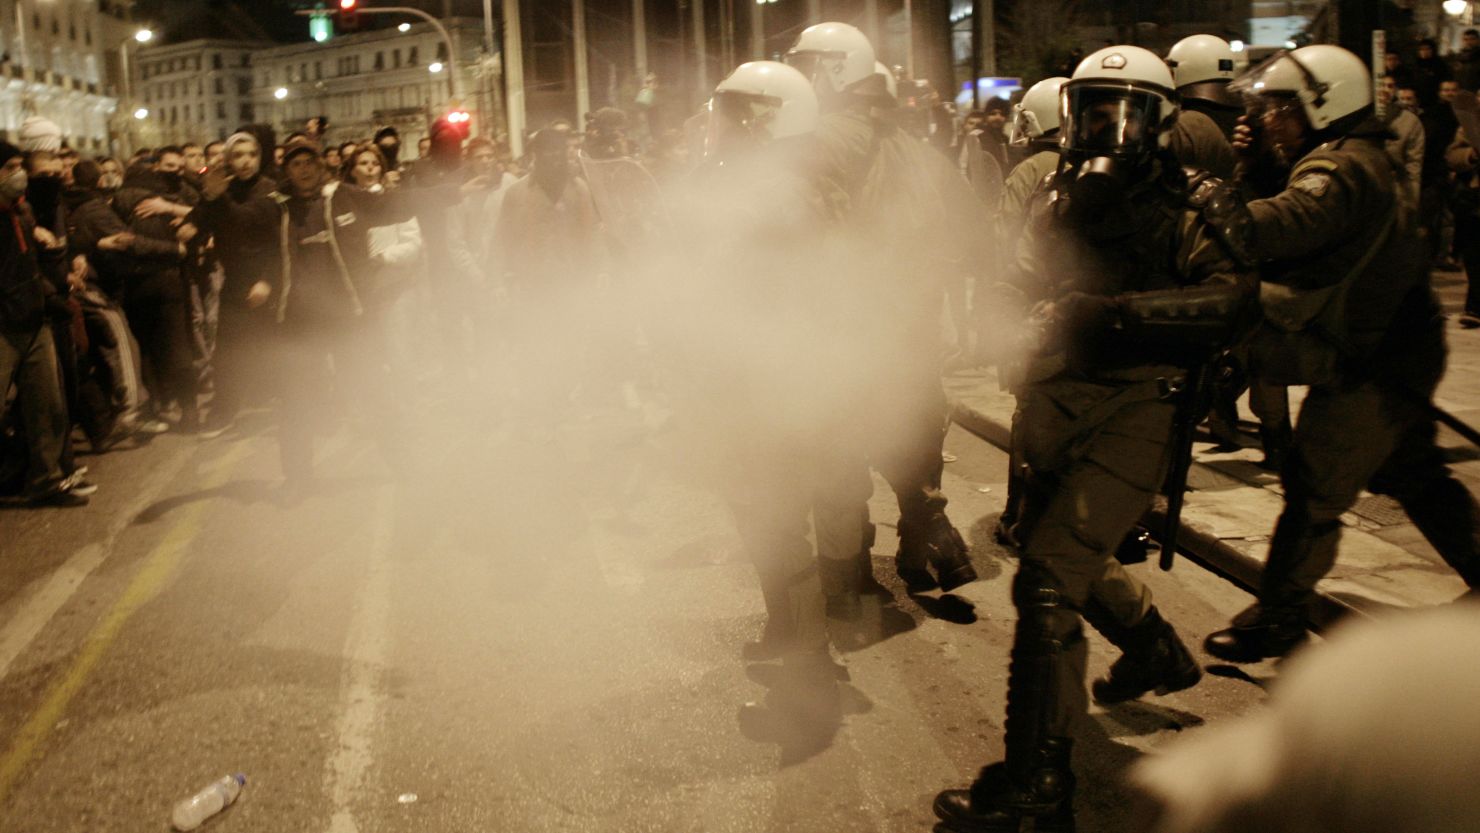 Riot police spray tear gas during a protest against austerity measures on February 19, 2012 in Athens.